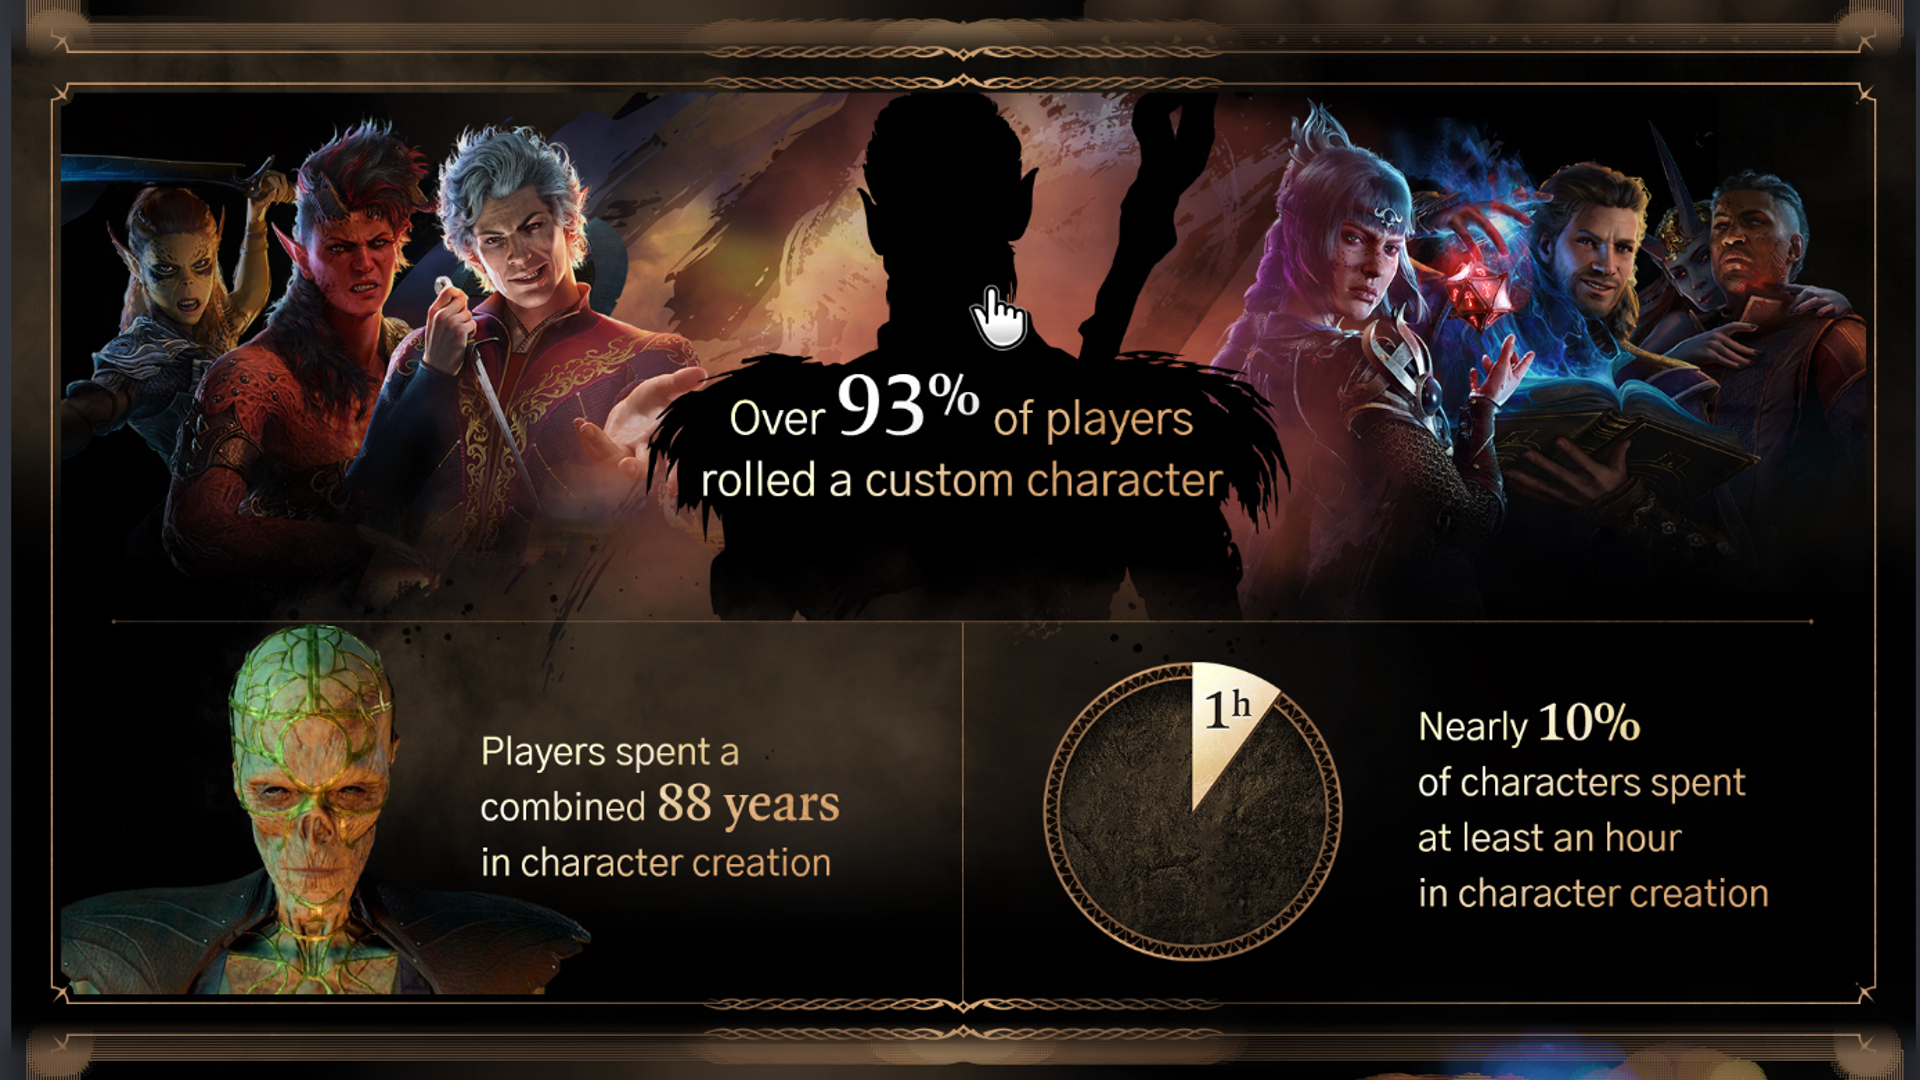 Almost a century spent in Baldur's Gate 3 character creation